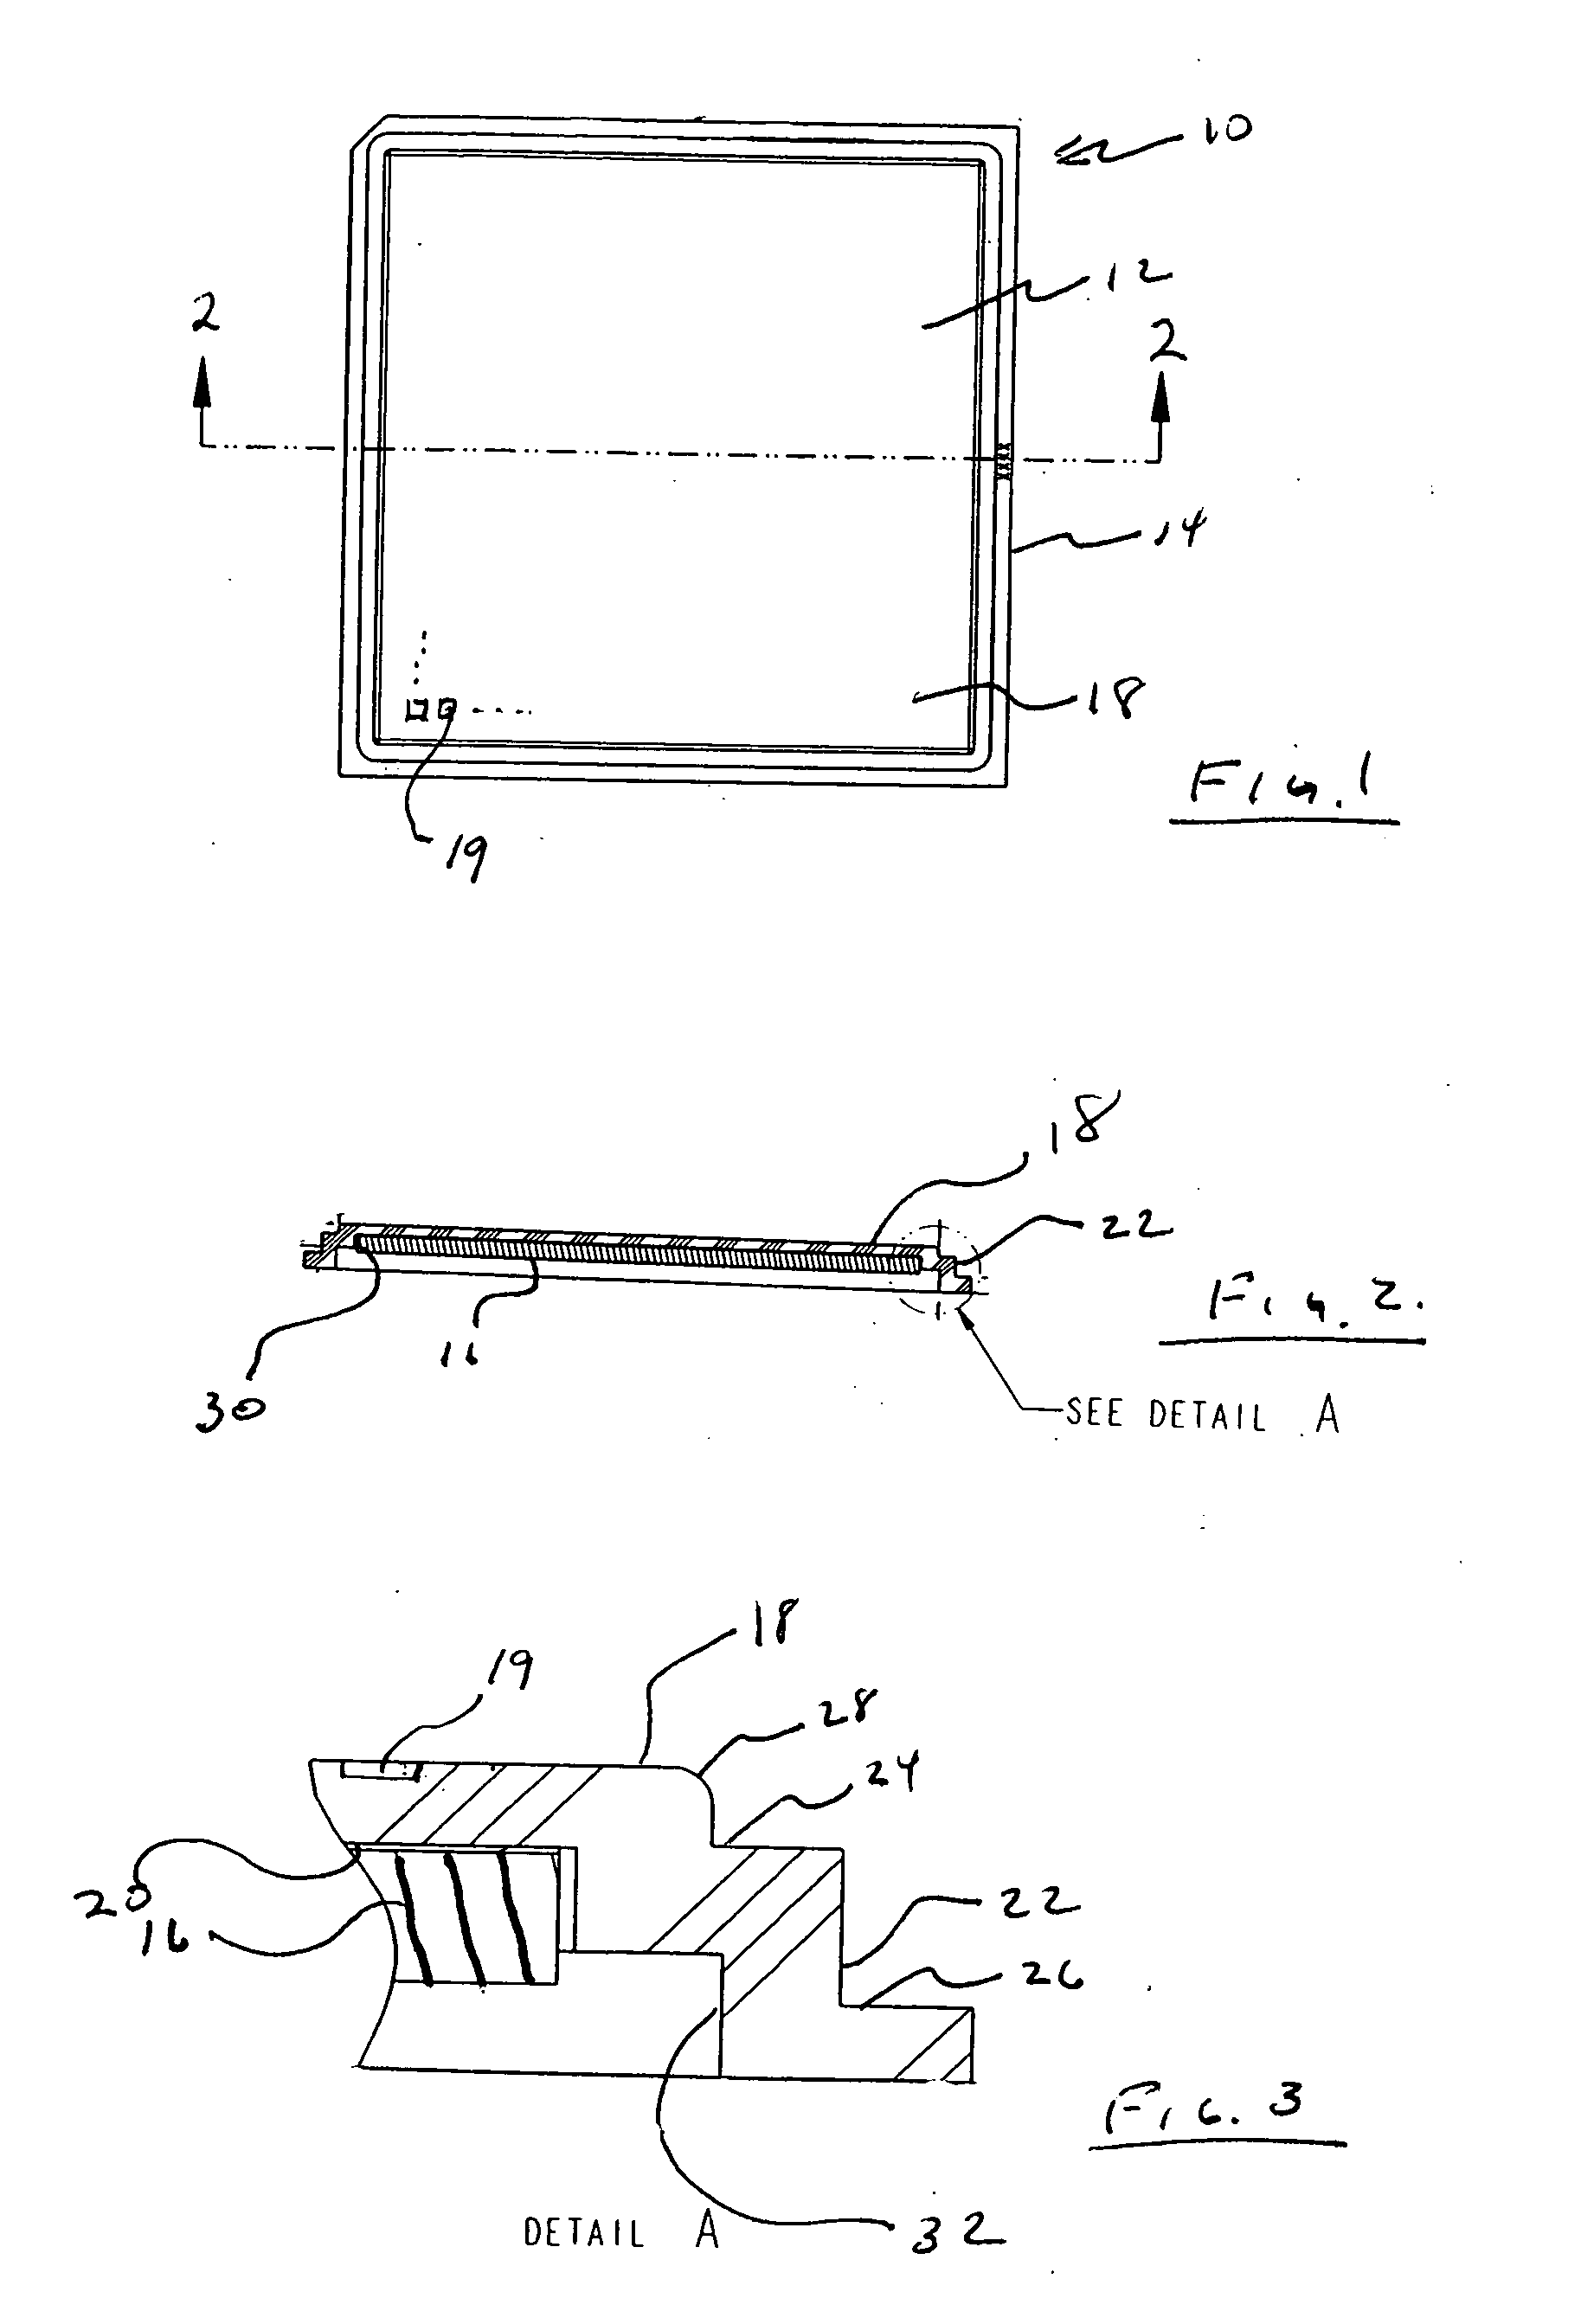 Tray for storing and transporting semi-conductor and other microelectronic components